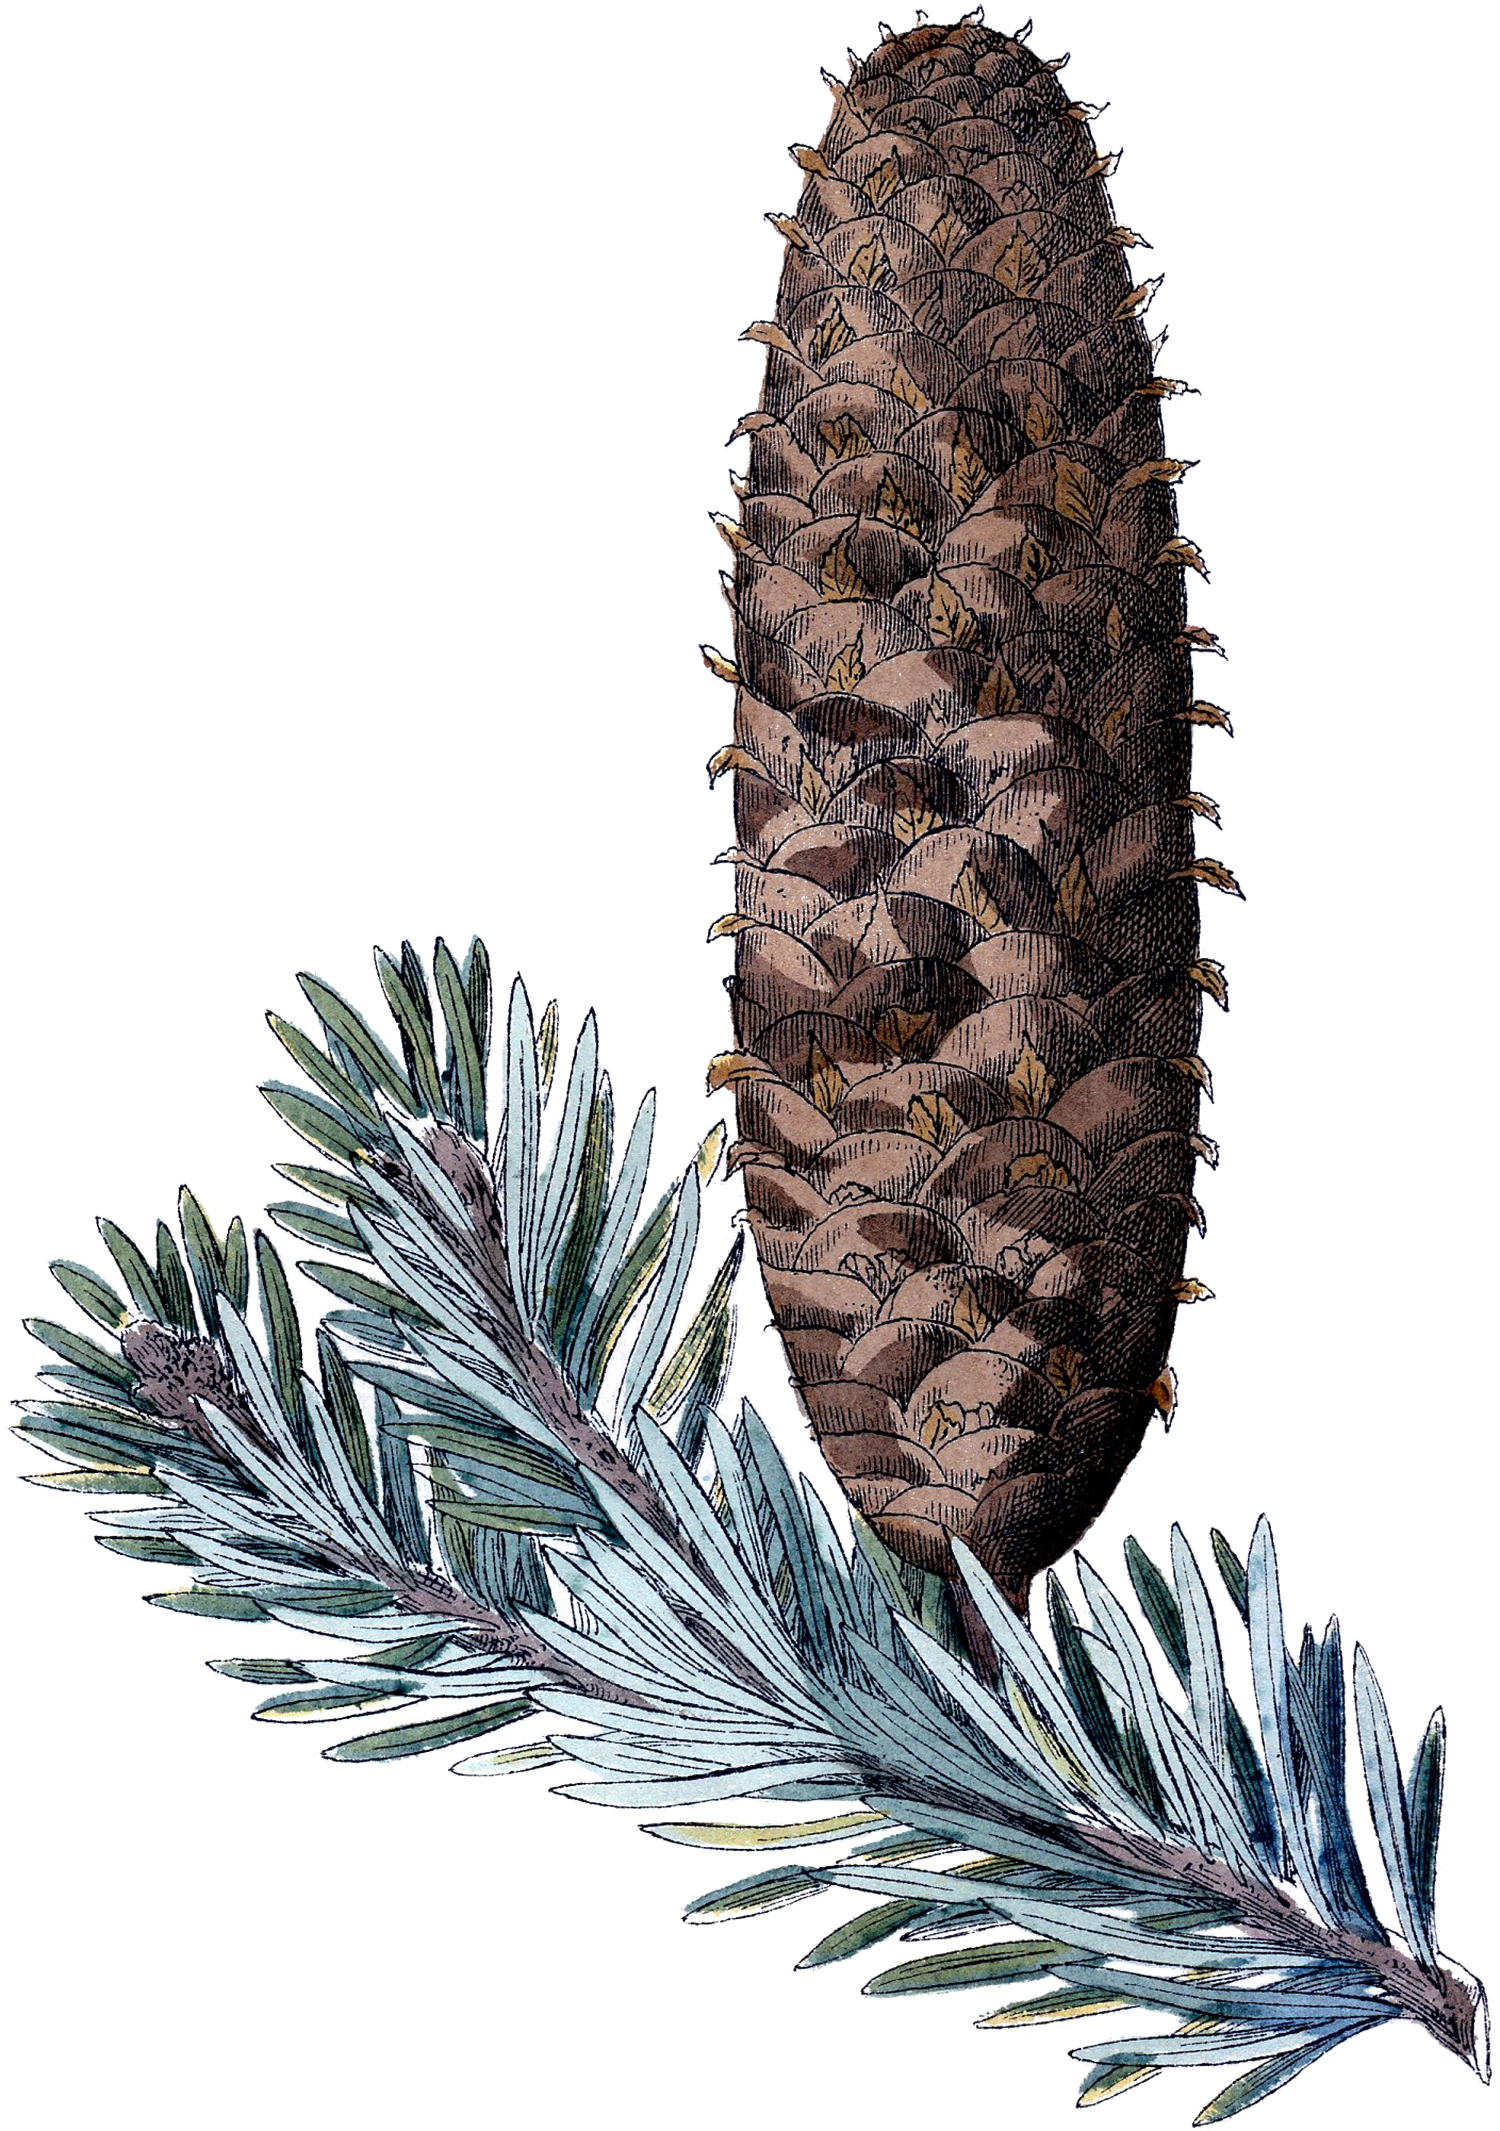 Pine branches with pine cones - a Royalty Free Stock Photo from